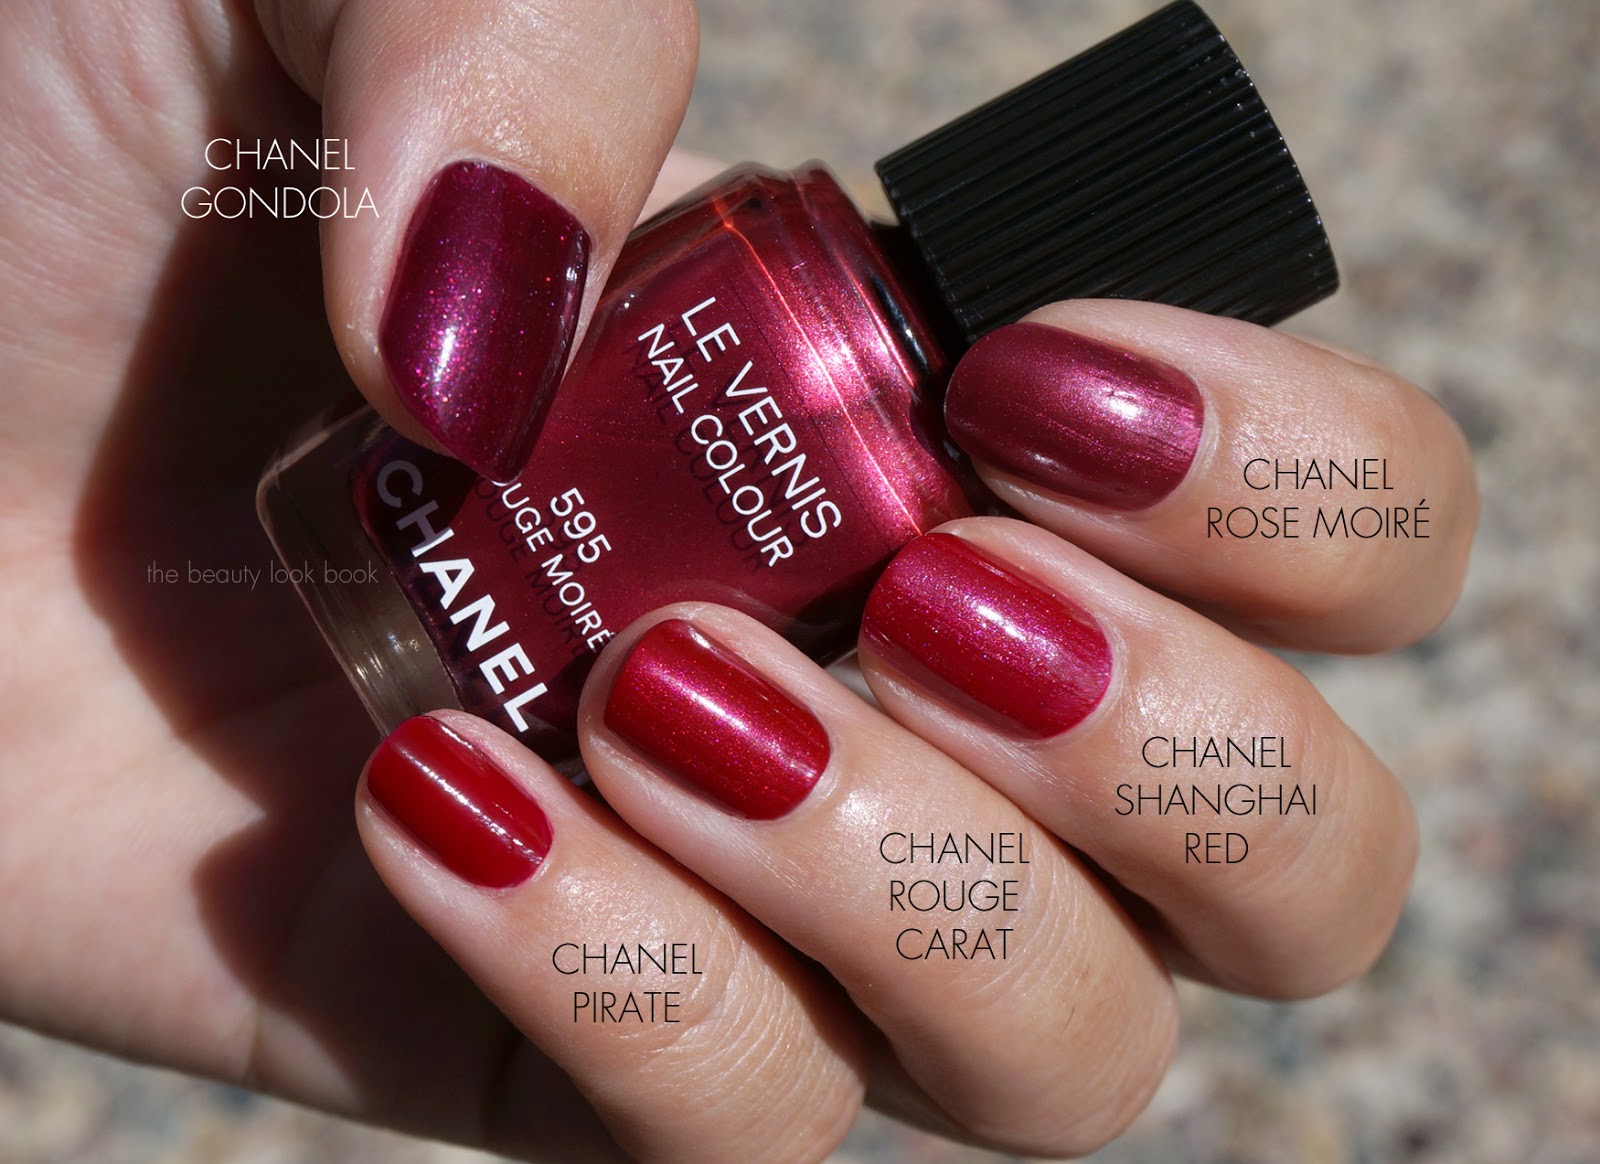 Chanel on your nails #2, Page 360